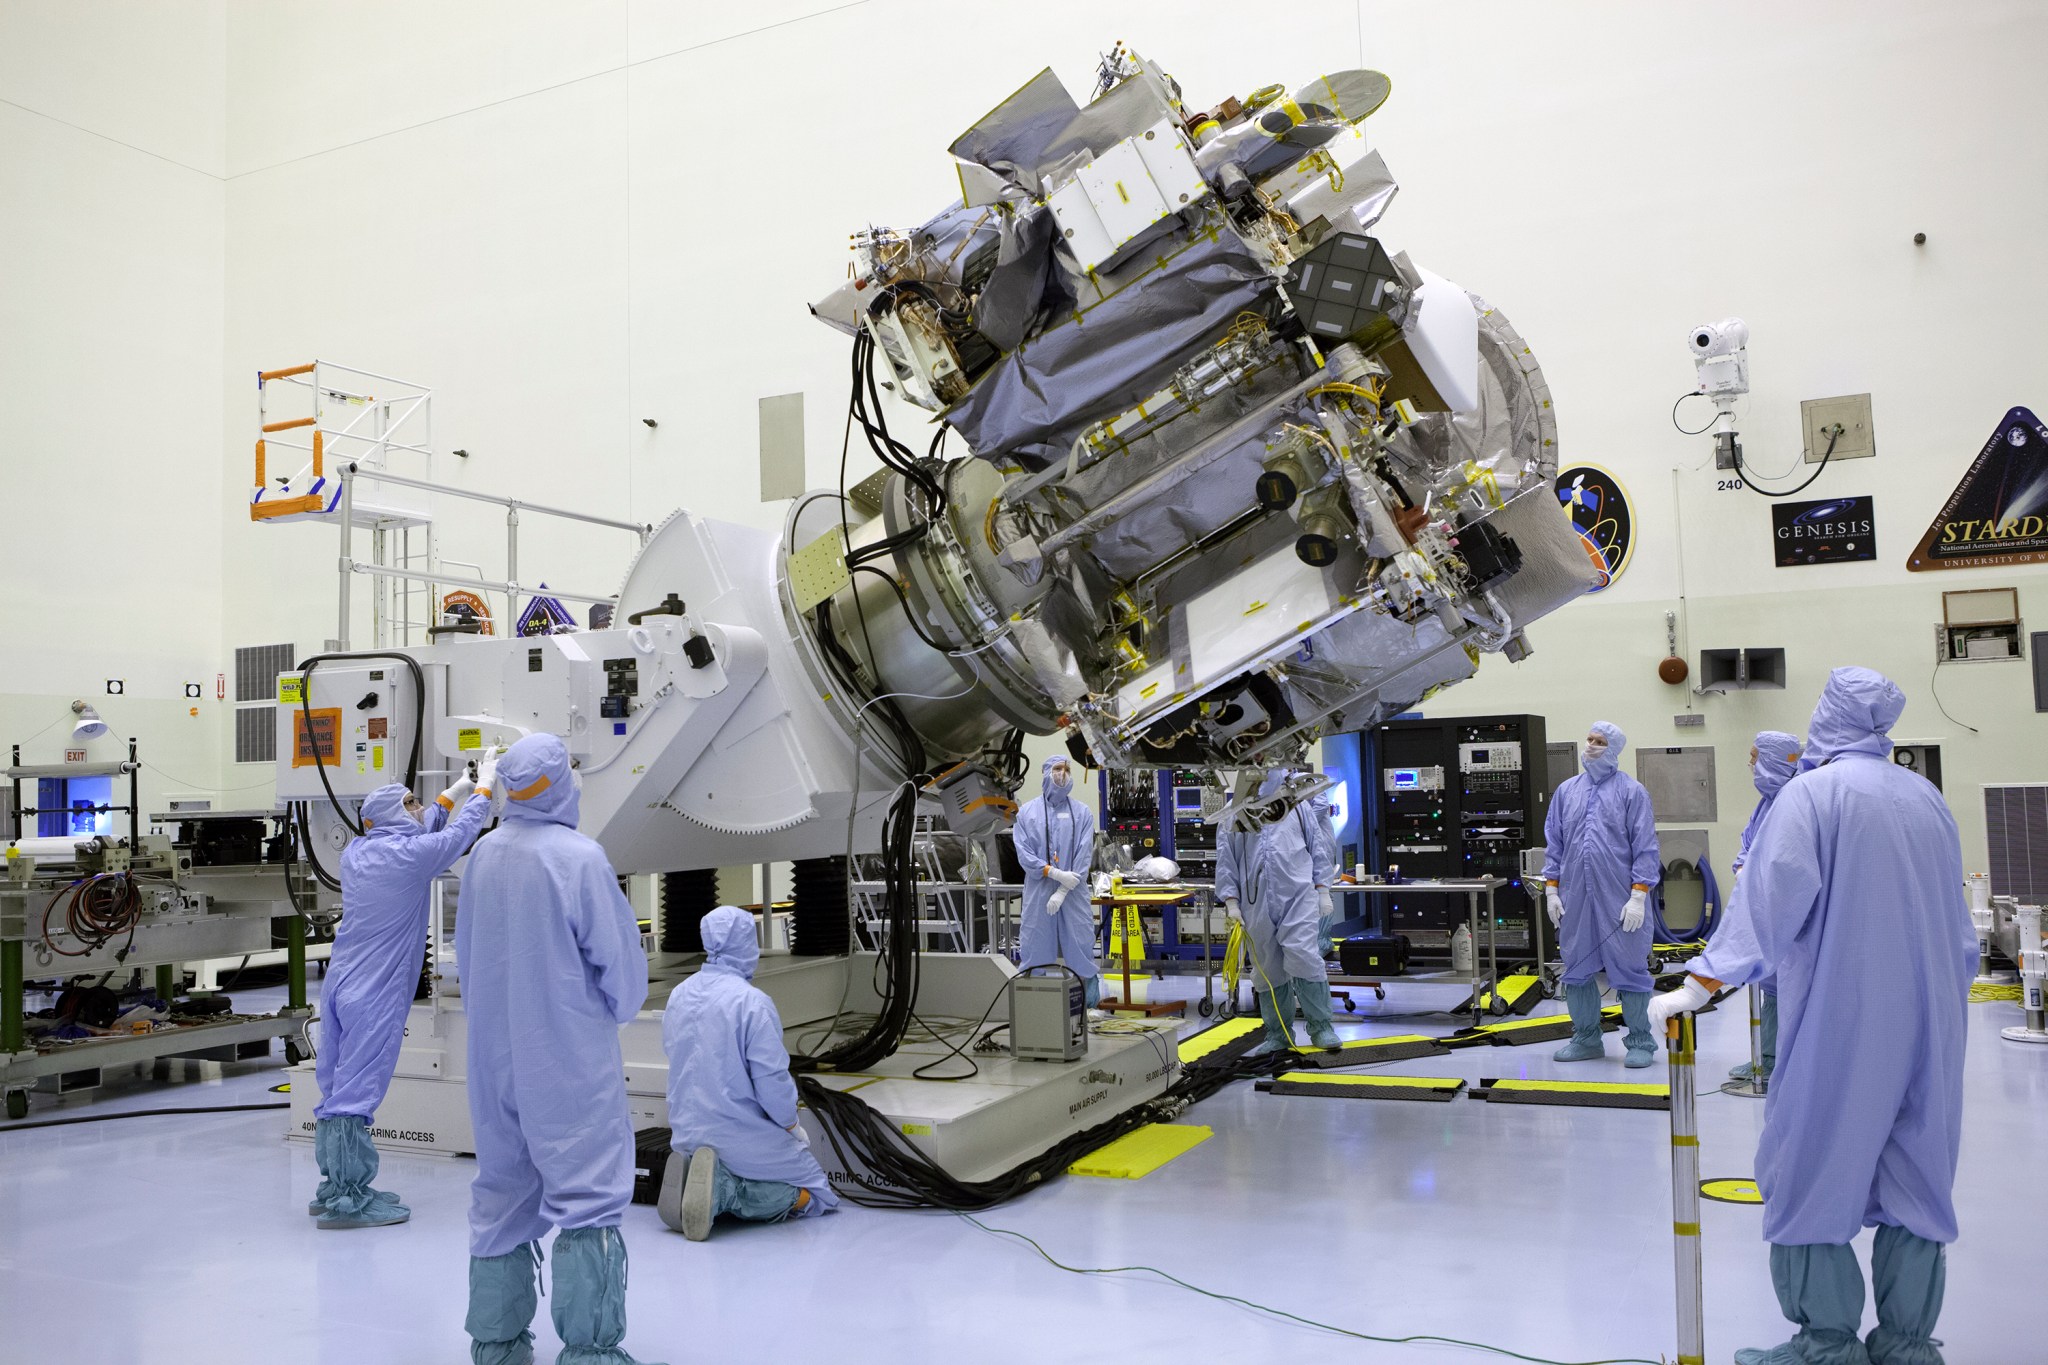 Engineers position the OSIRIS-REx spacecraft during processing at NASA's Kennedy Space Center in Florida.